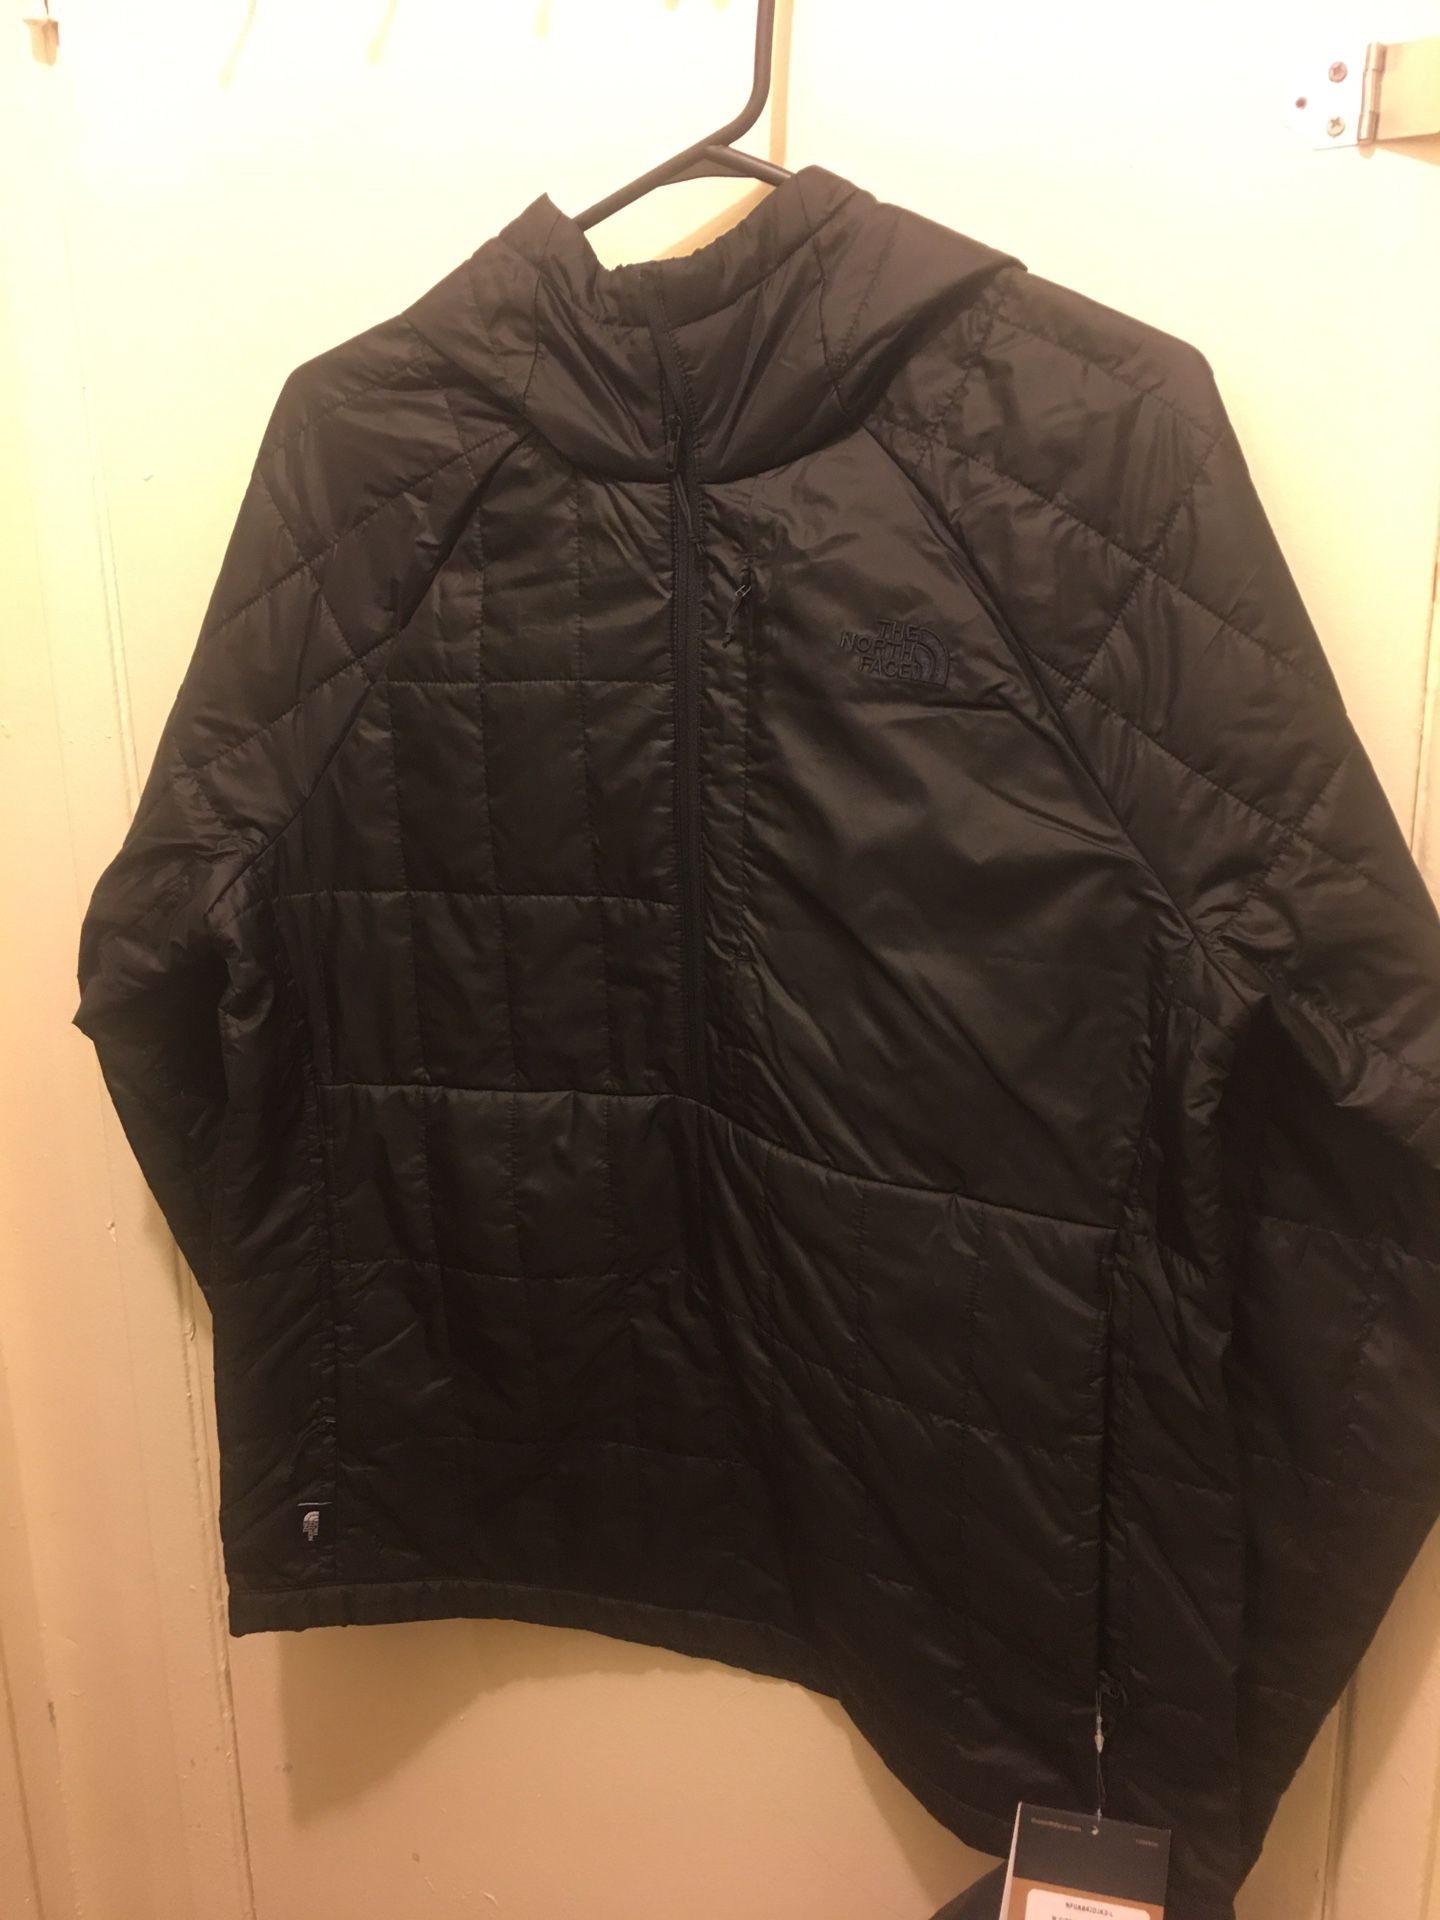 North Face Jacket For Women 